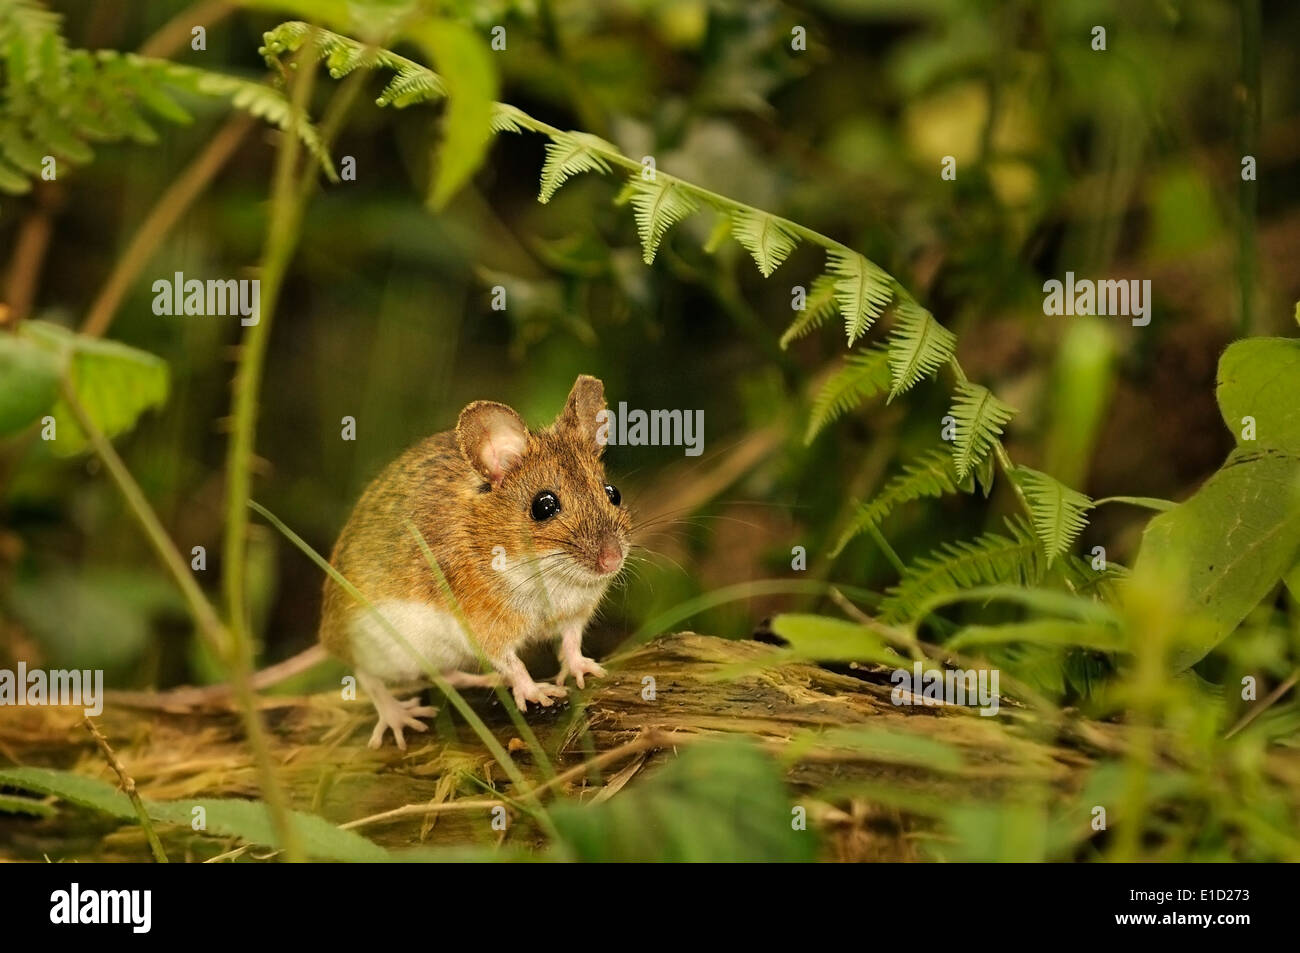 Horizontal portrait of wood mouse, Apodemus sylvaticus, on a branch in a forest. Stock Photo